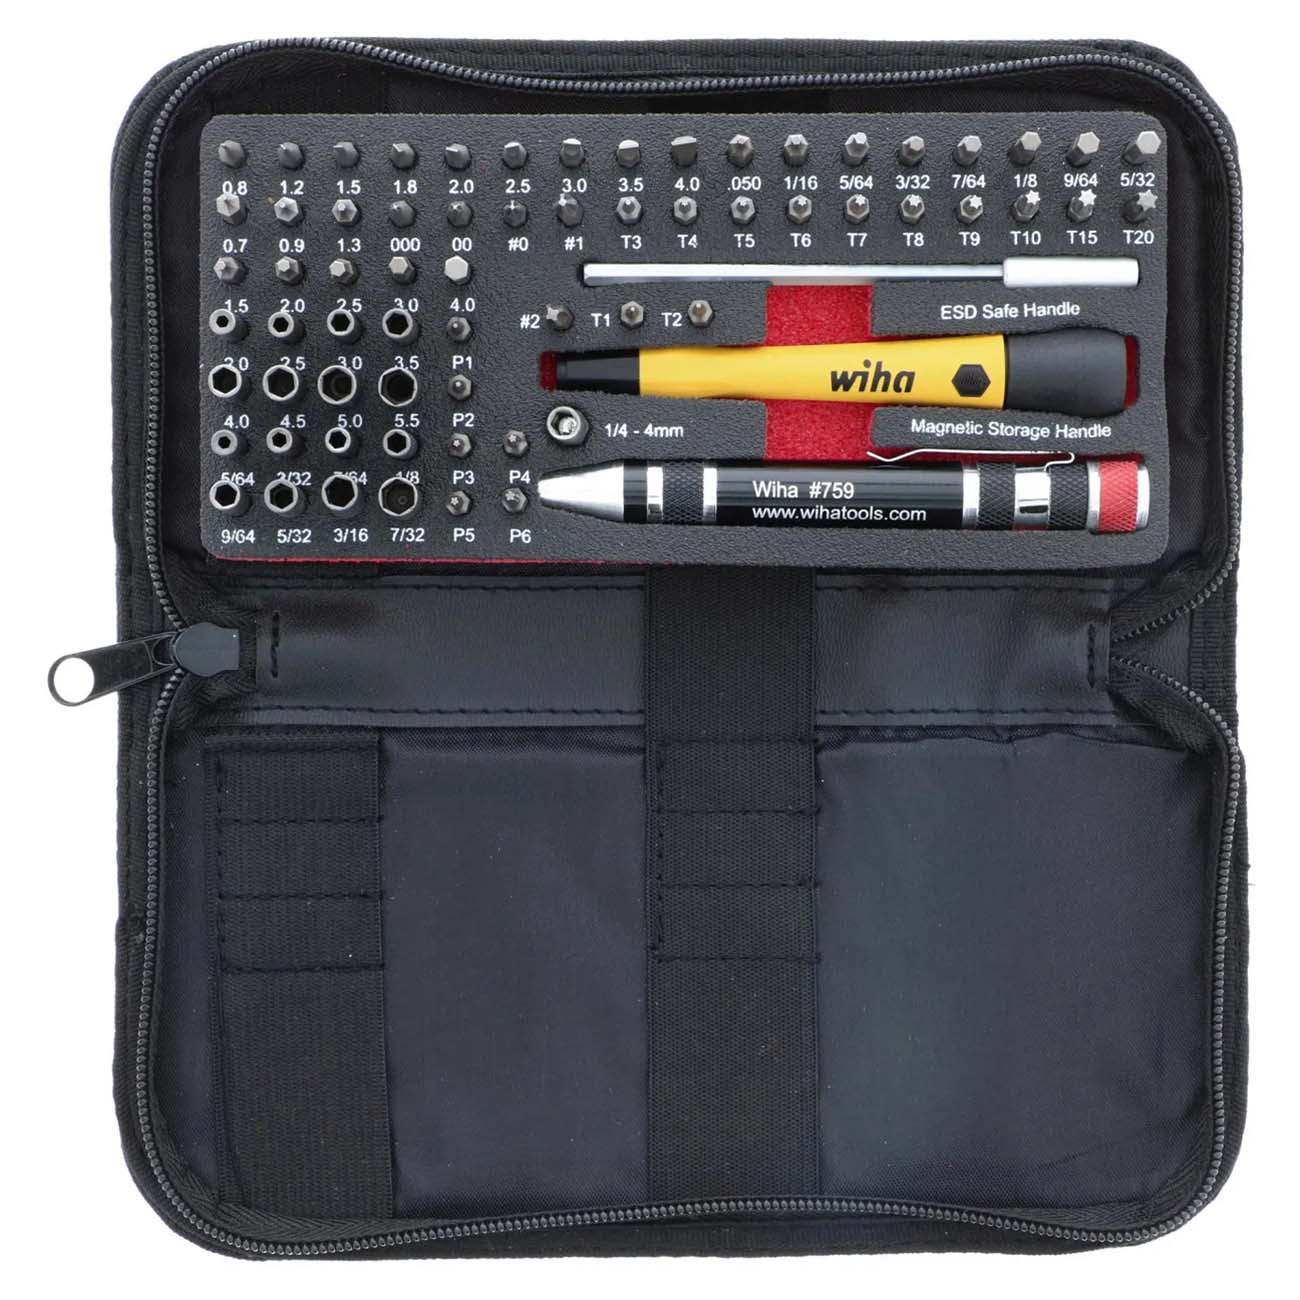 Wiha Master Technician Esd Safe Ratchet And Micro Bits Set With Travel Bag - 68 Piece Set